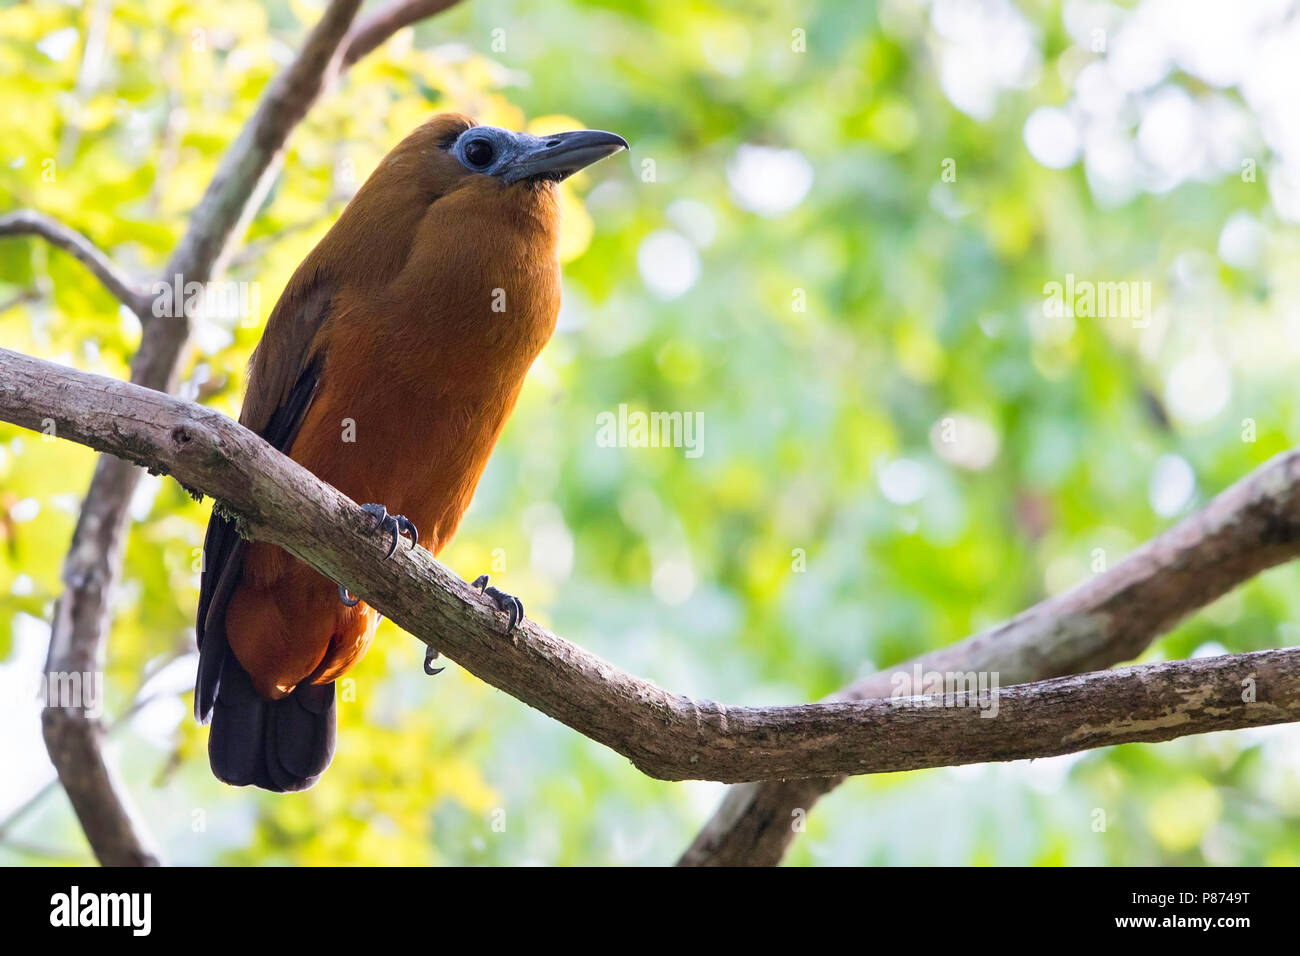 Capuchinbird (Perissocephalus tricolor), a large passerine bird of the family Cotingidae and is found in humid forests. The most distinctive feature i Stock Photo